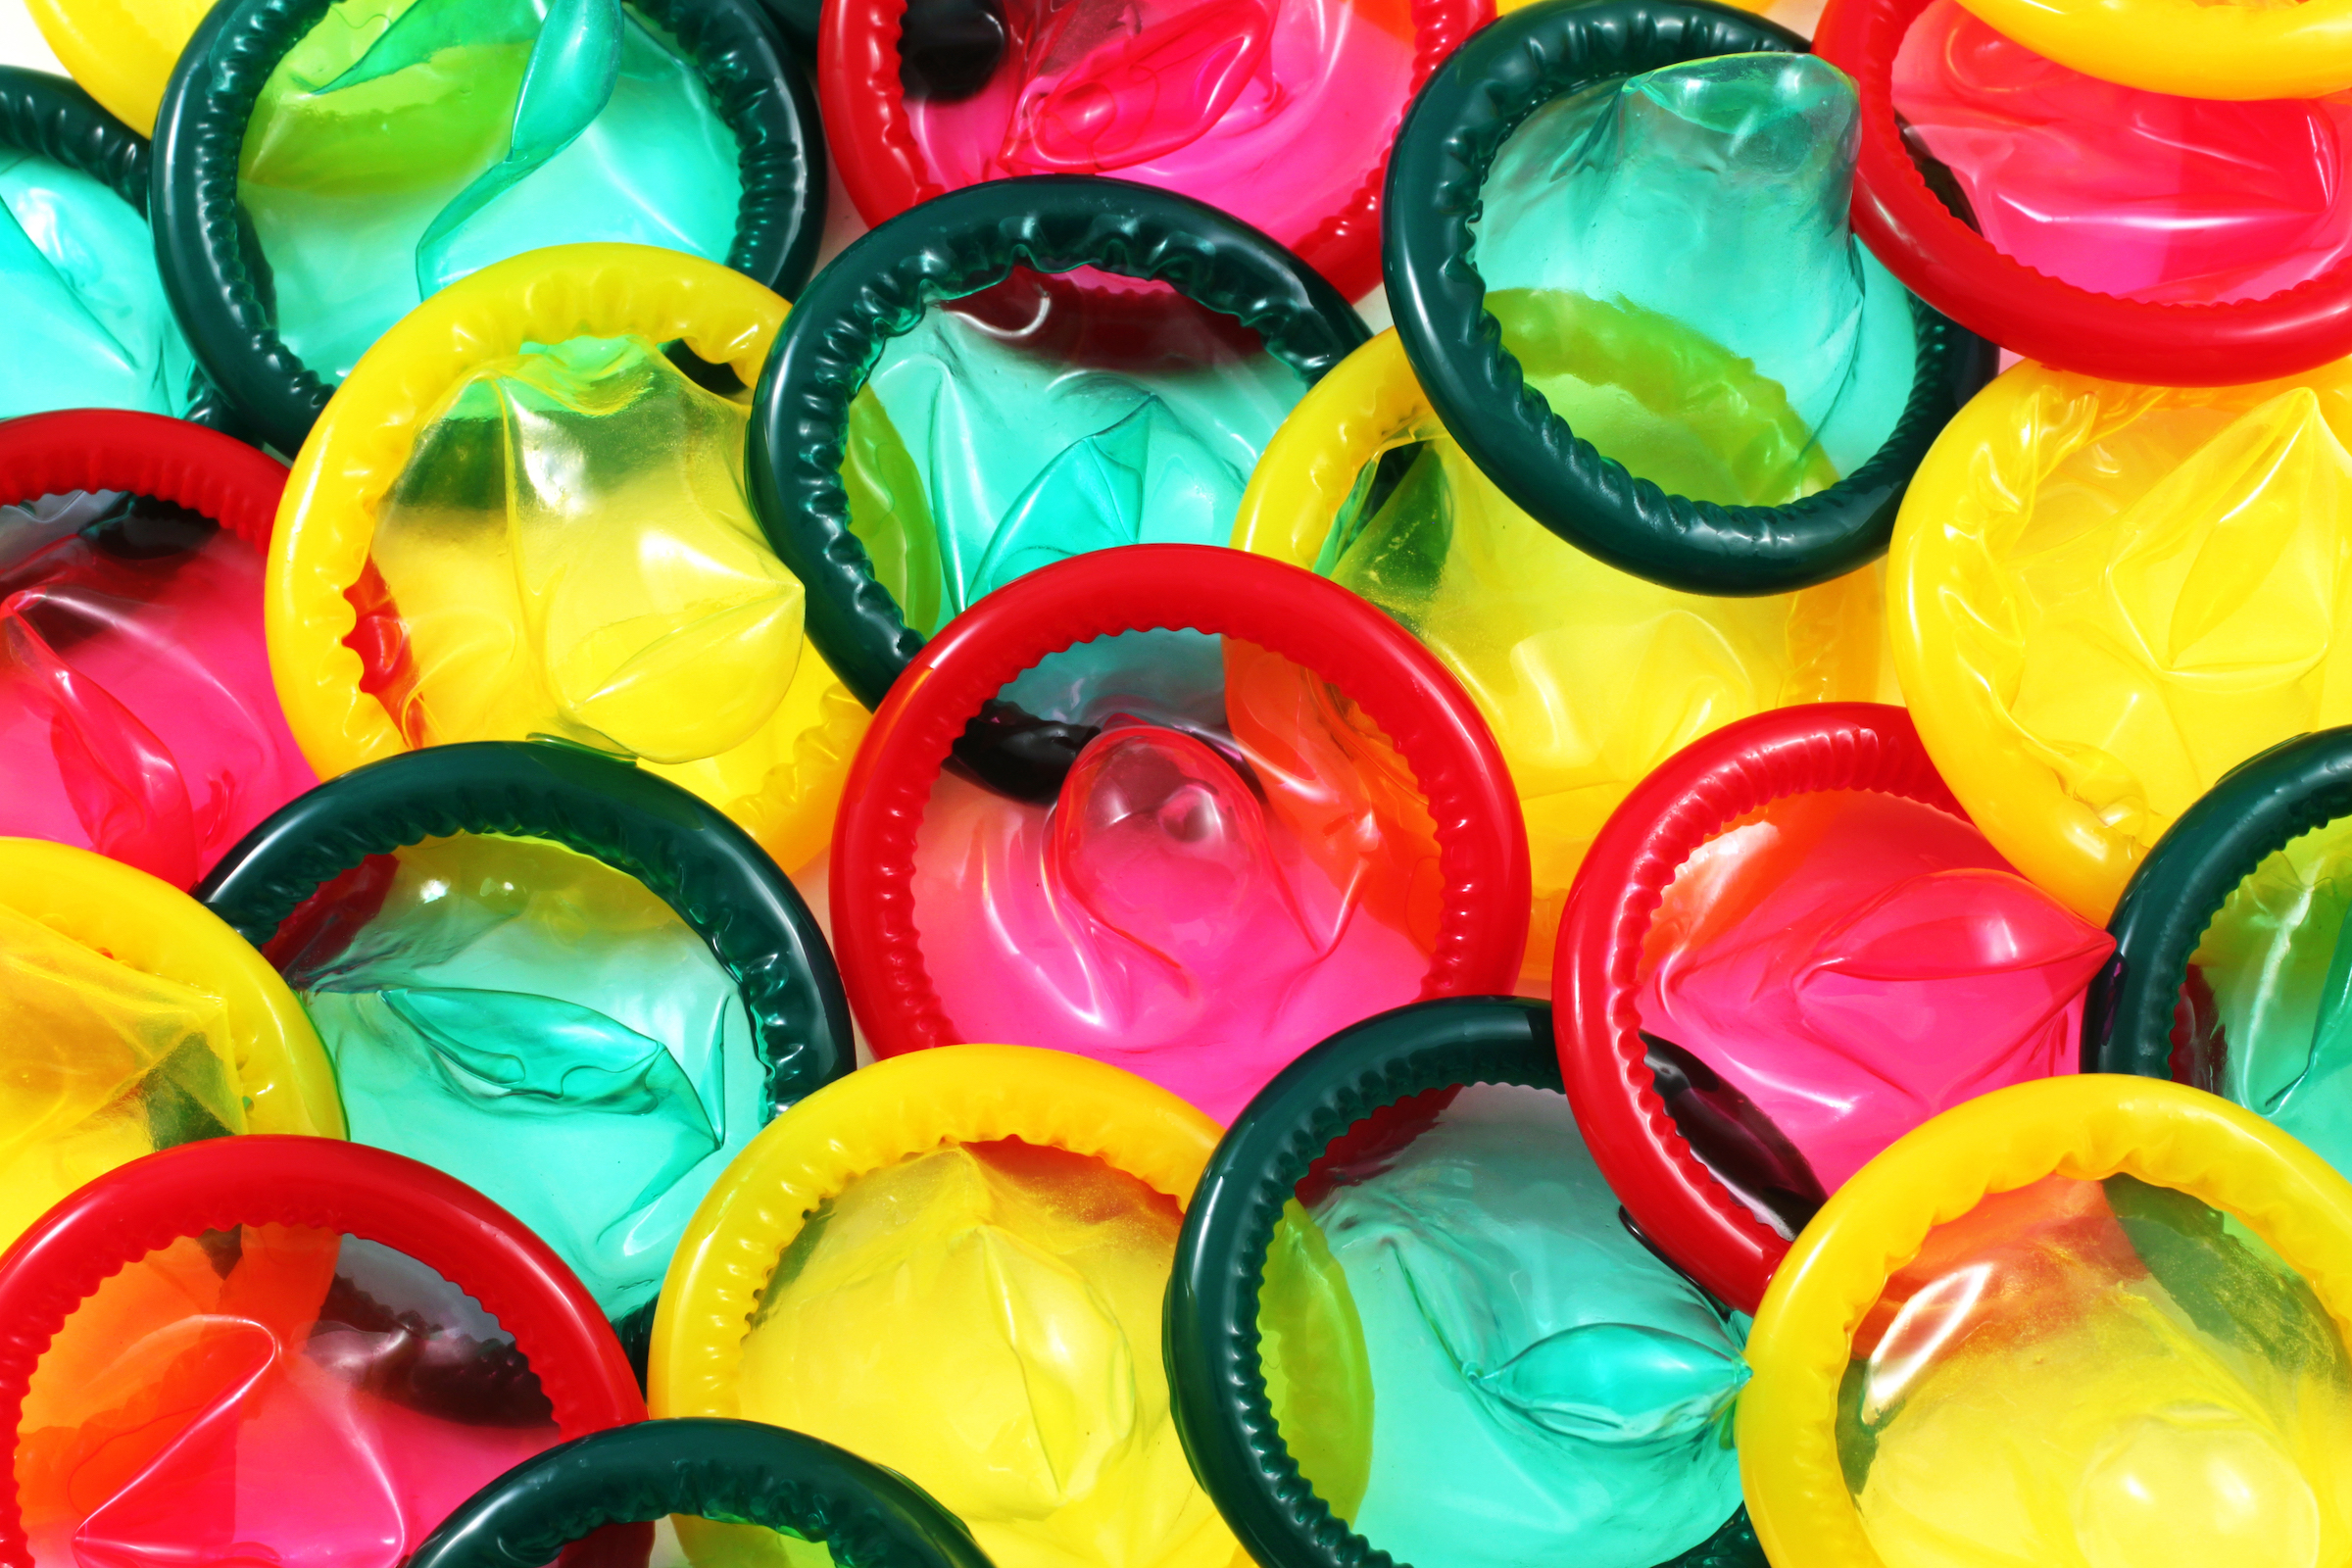 Essential Facts About Condoms